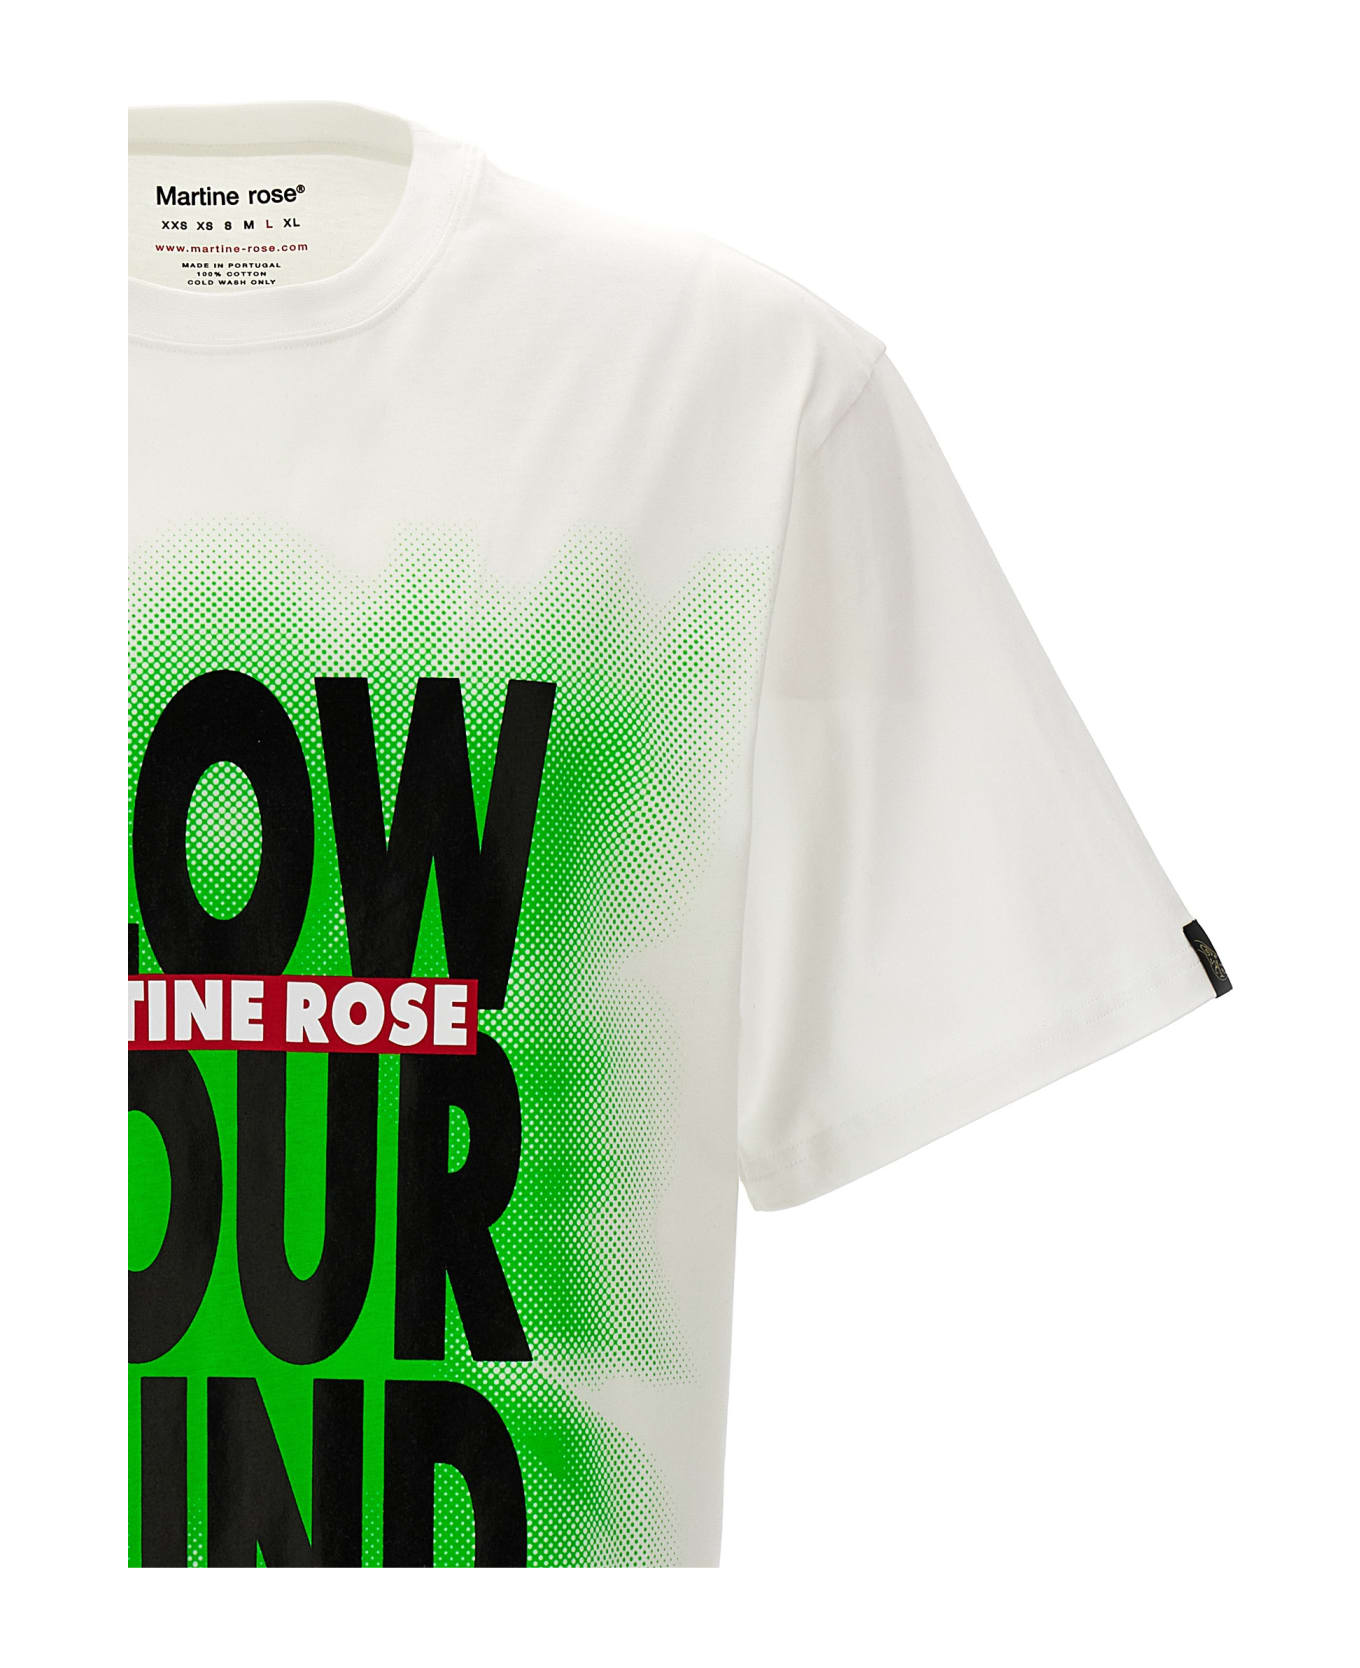 Martine Rose 'blow Your Mind' T-shirt - White